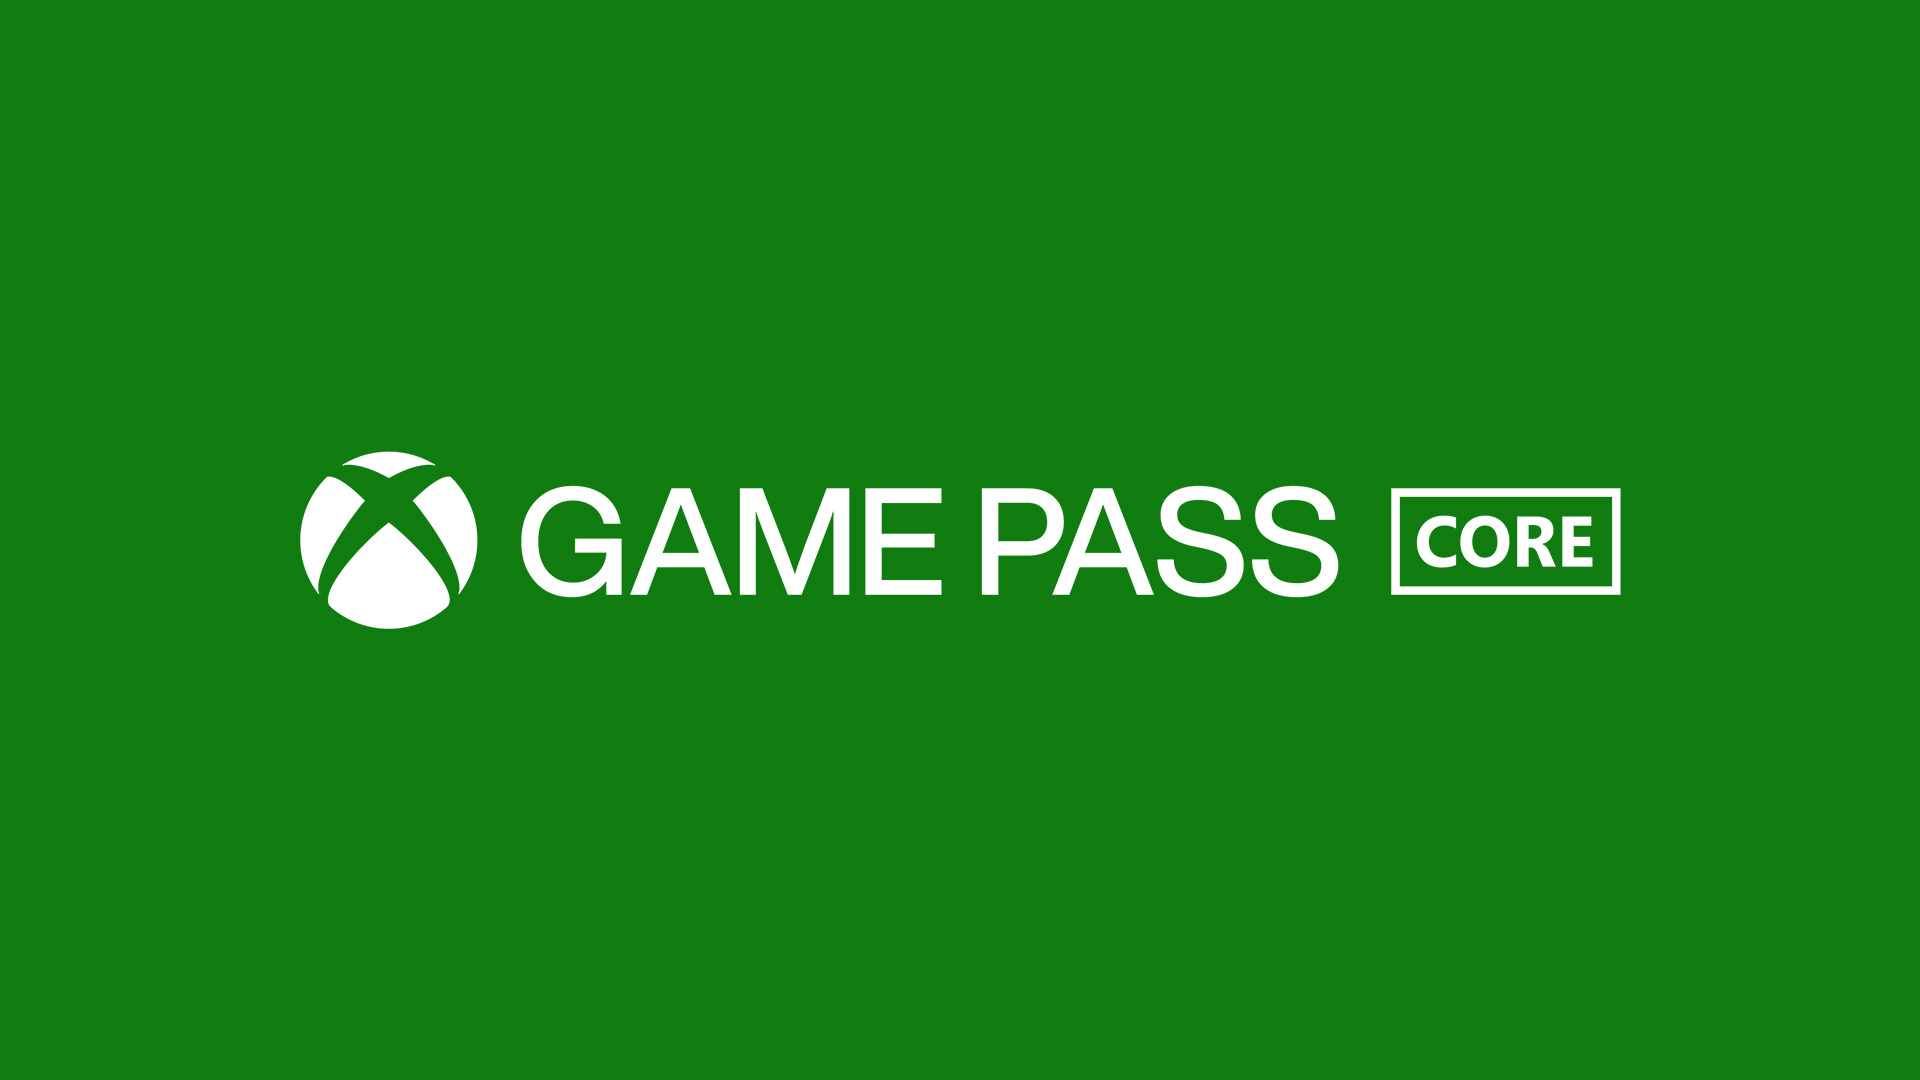 New Games with Gold for September 2020 - Xbox Wire